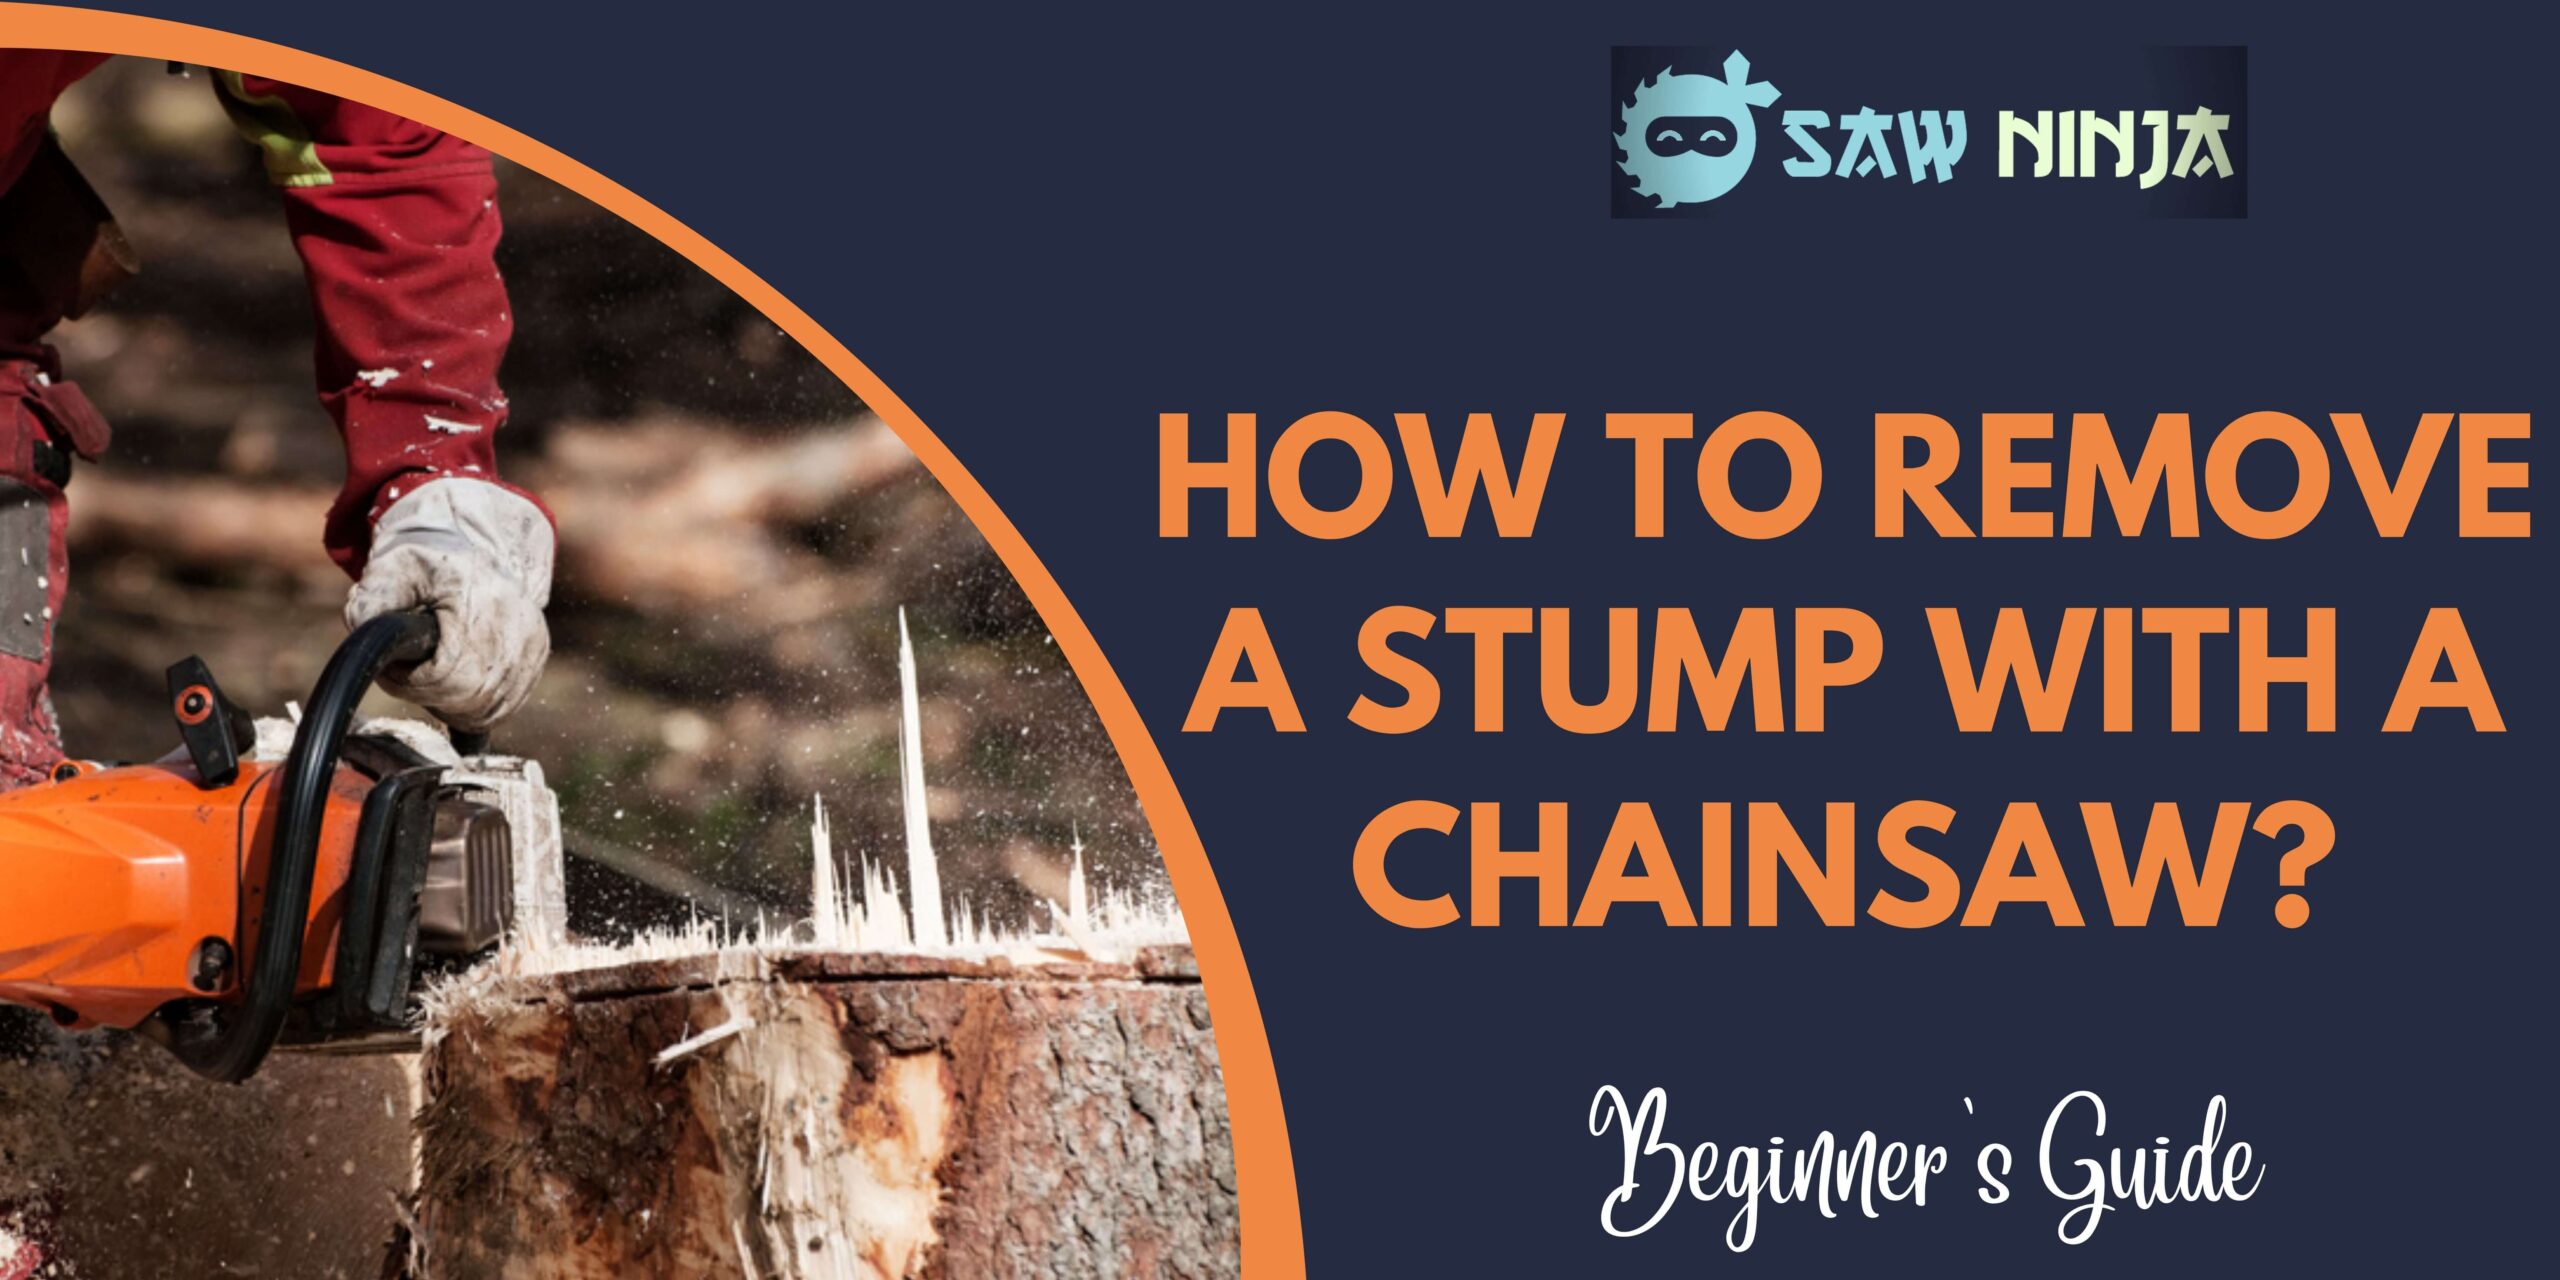 How To Remove A Stump With A Chainsaw